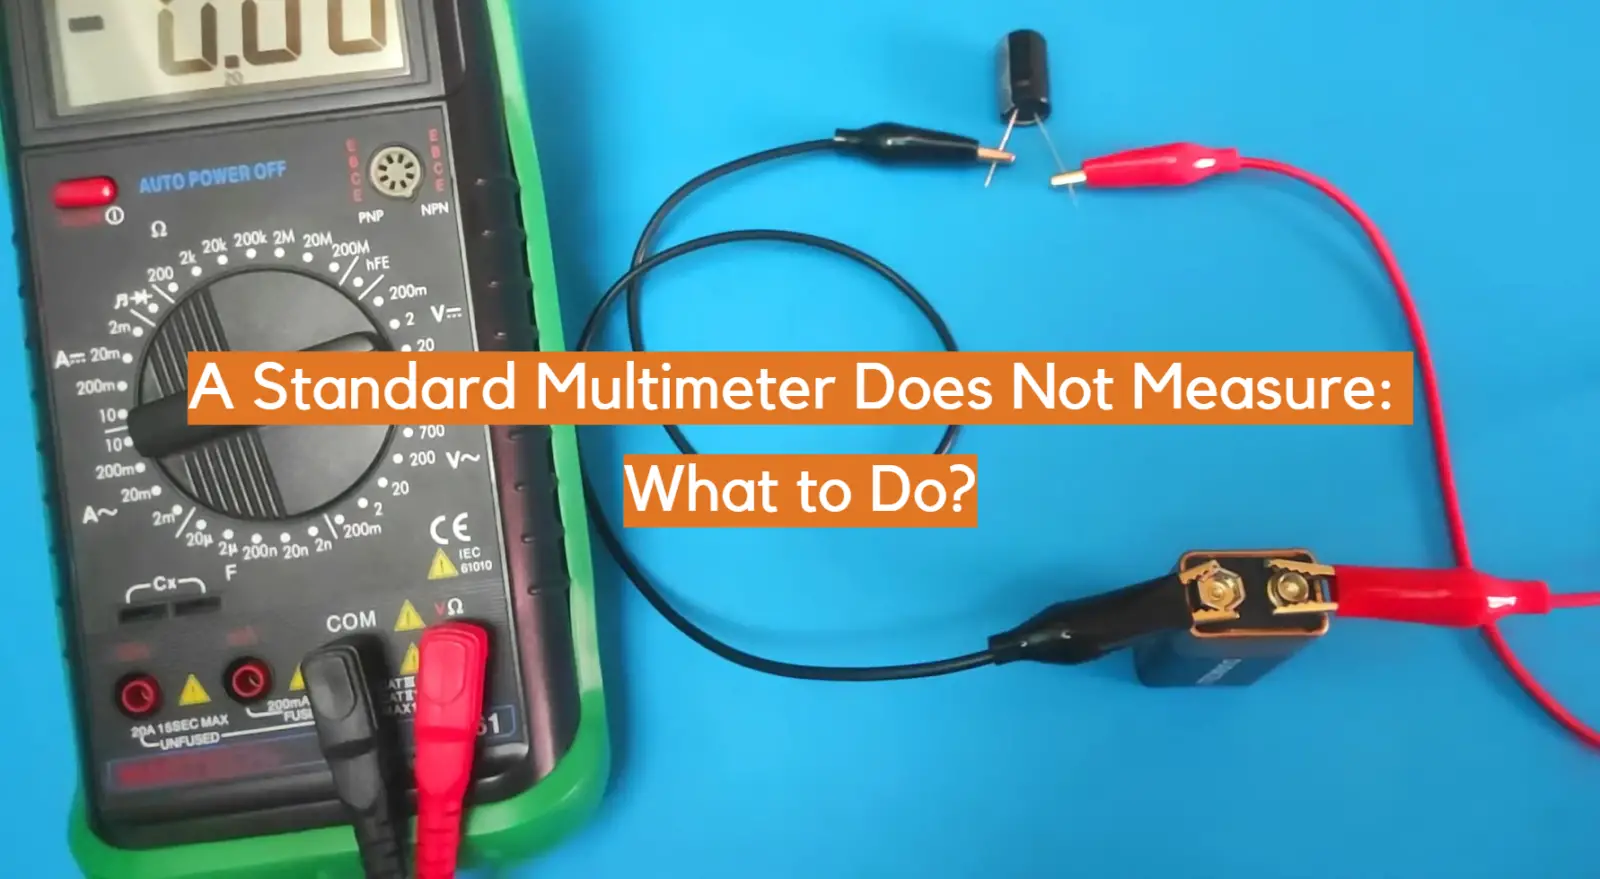 A Standard Multimeter Does Not Measure: What to Do?